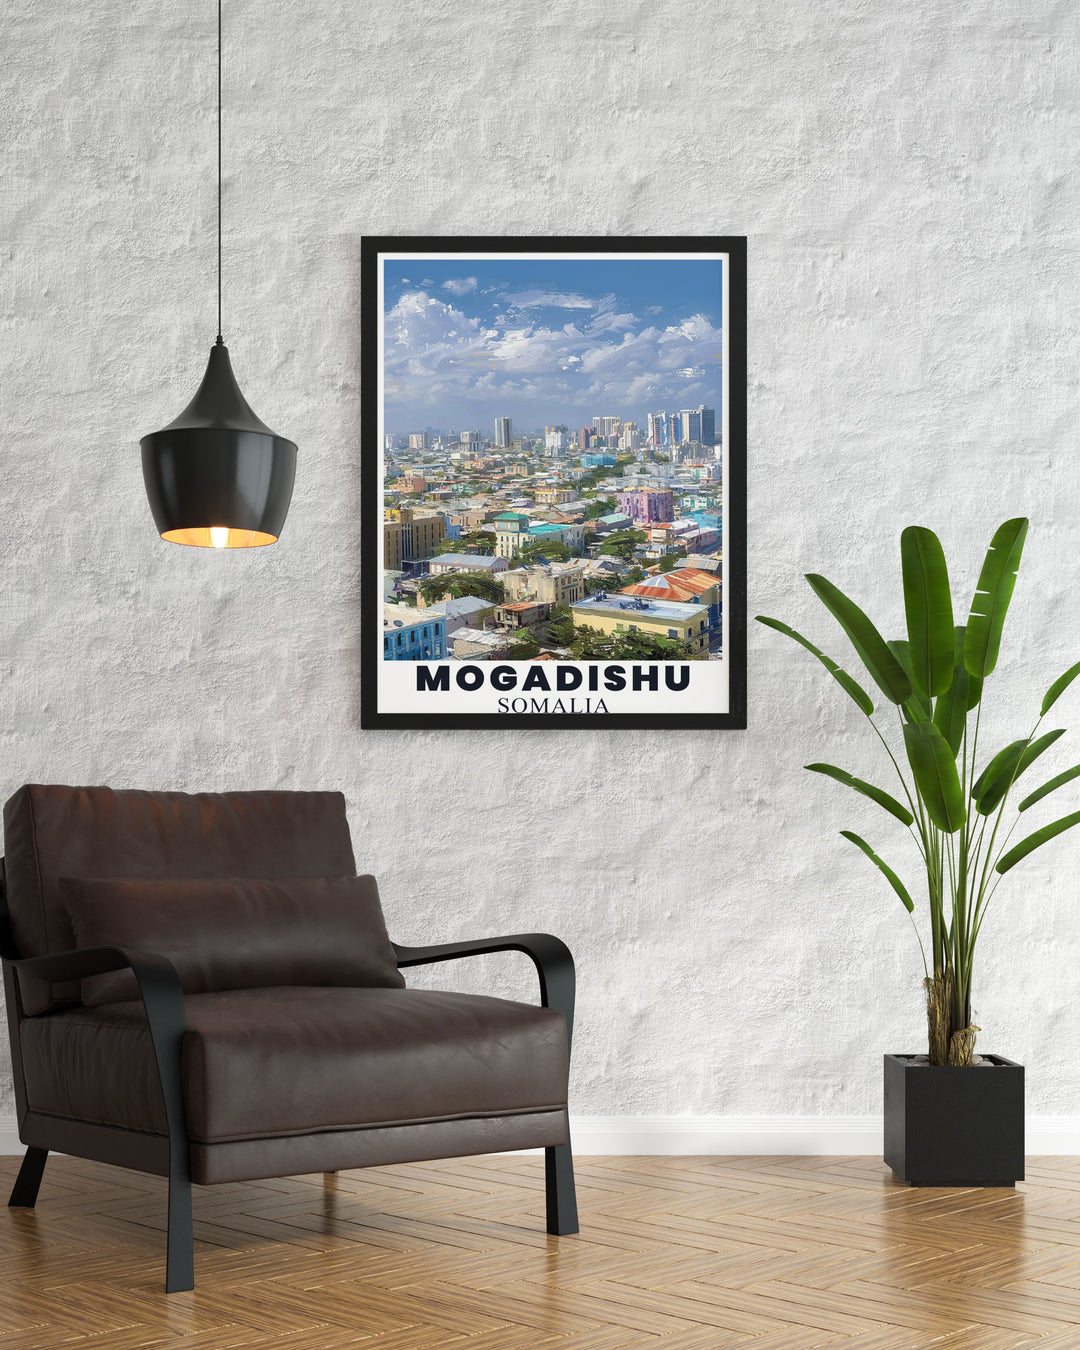 This poster of Mogadishu captures the breathtaking views and rich history of the citys landmarks, inviting viewers to experience the unique charm and adventure of Somalia.